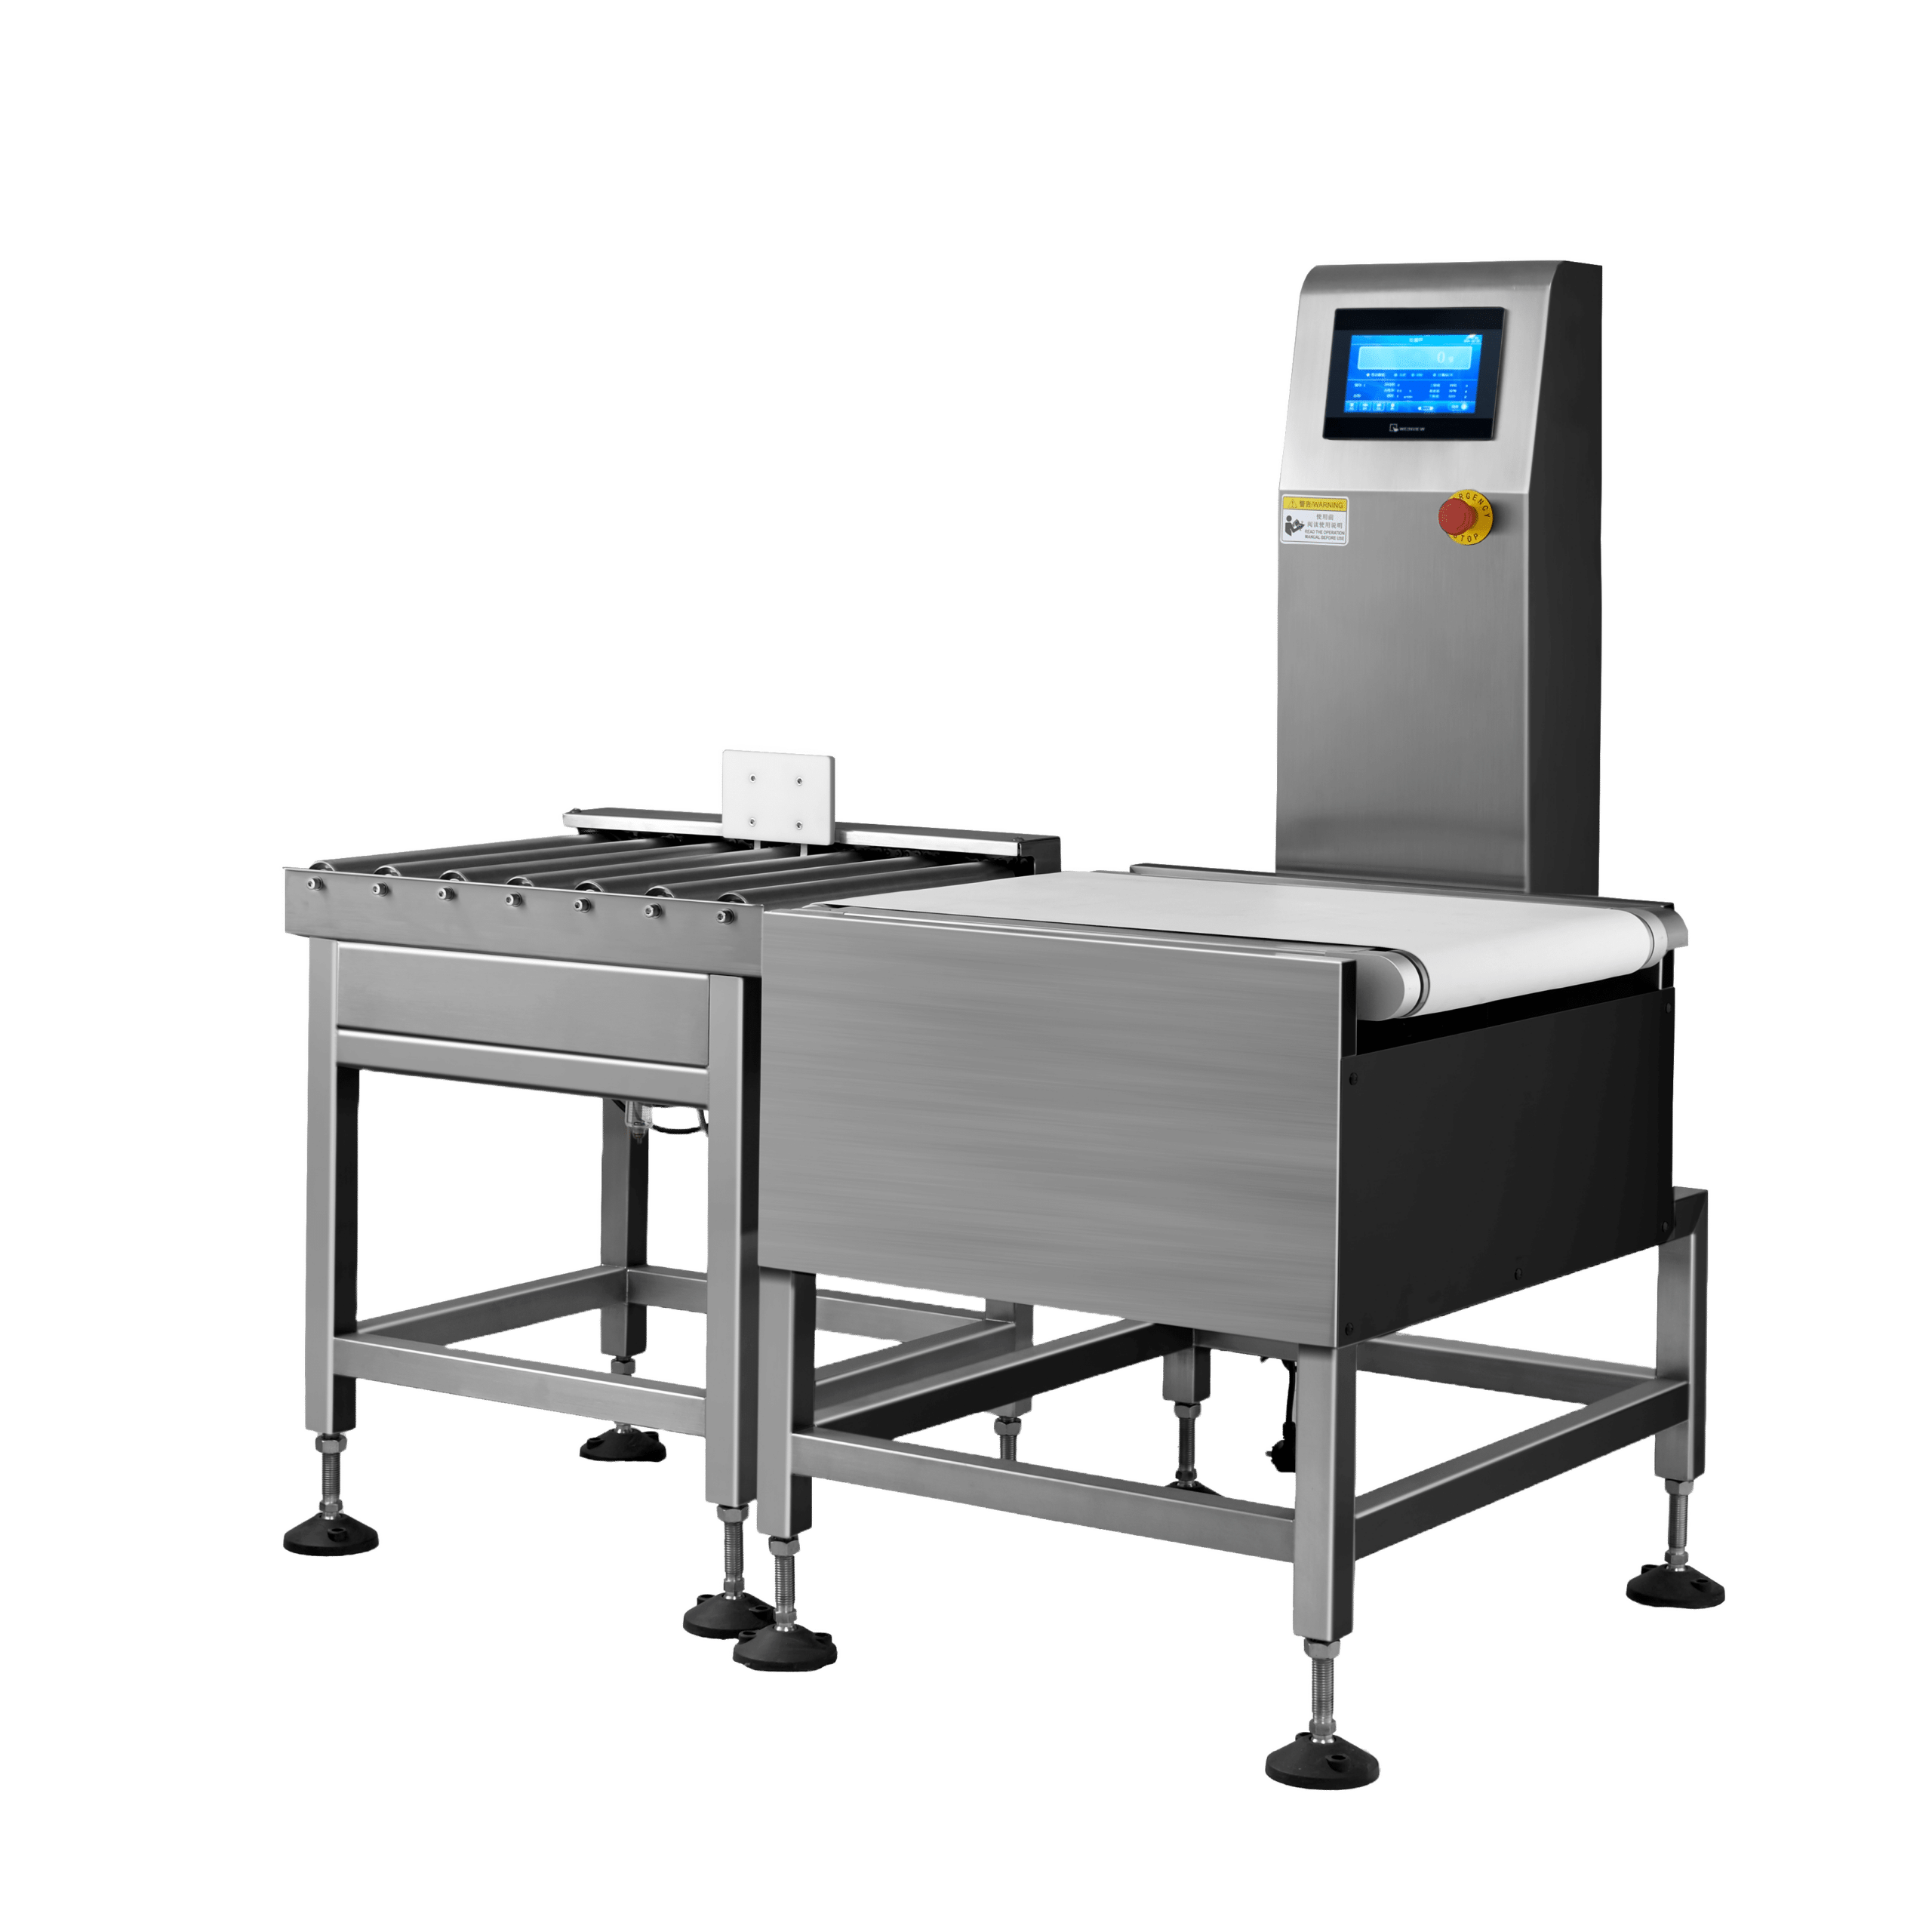 Checkweigher HMS-450